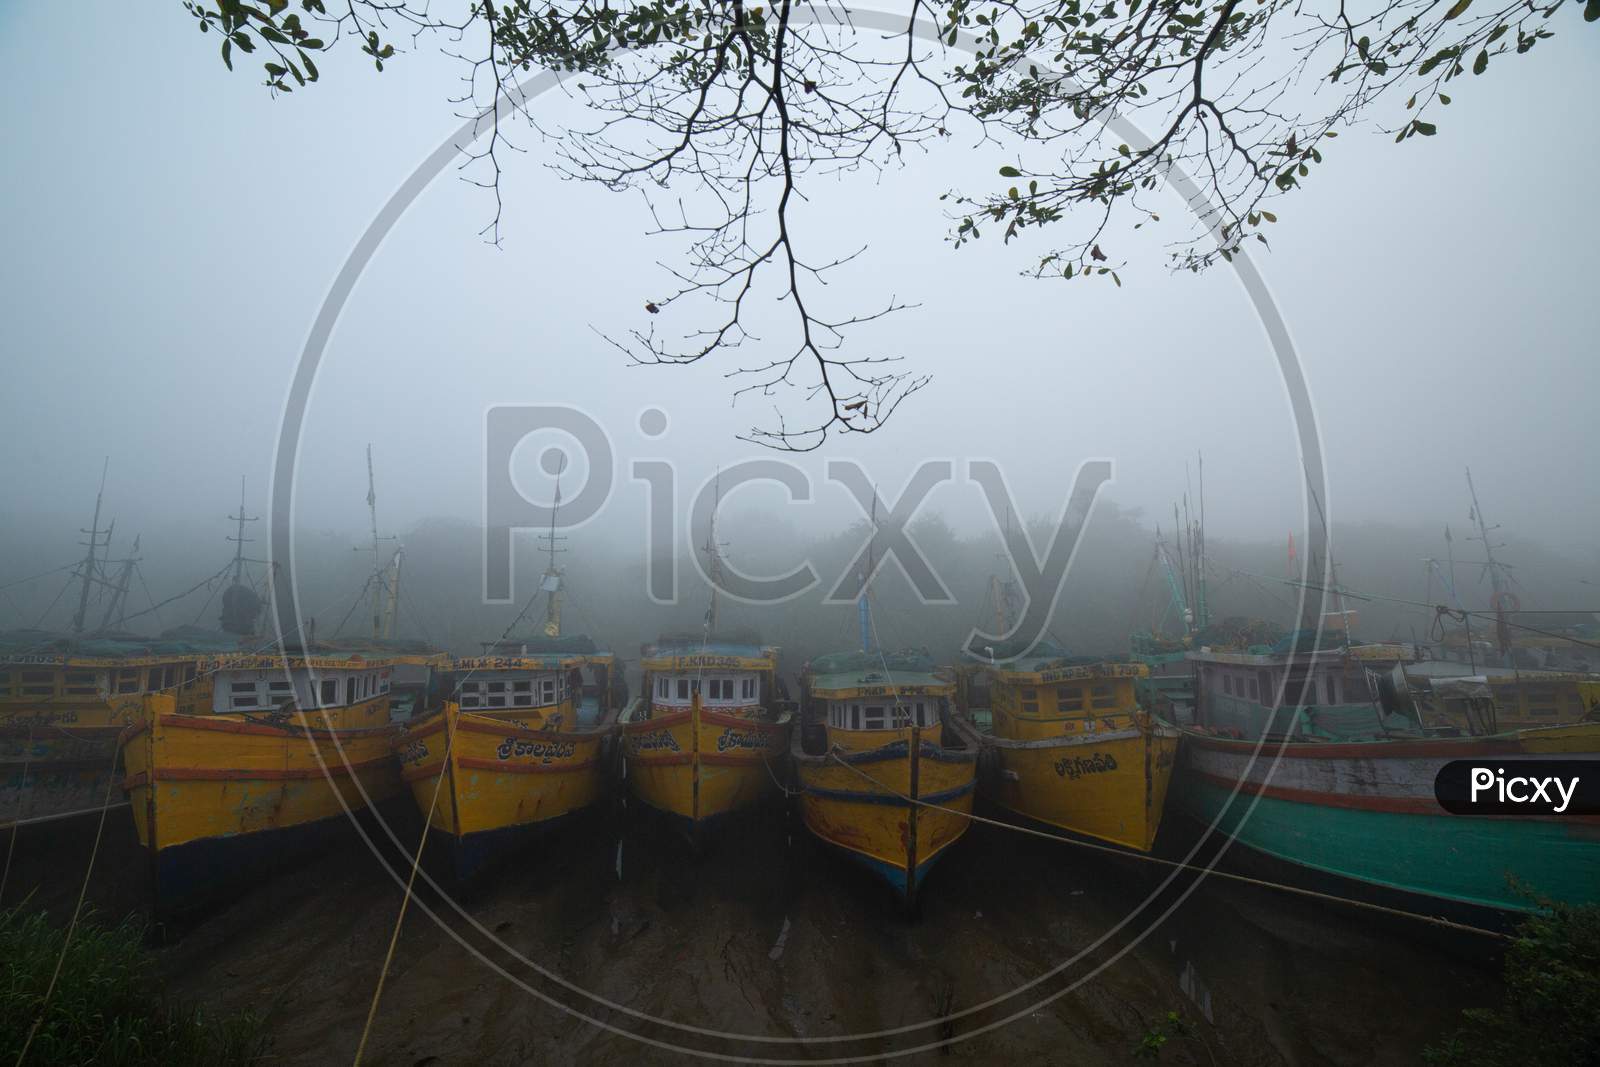 View of boats along the bay during fog